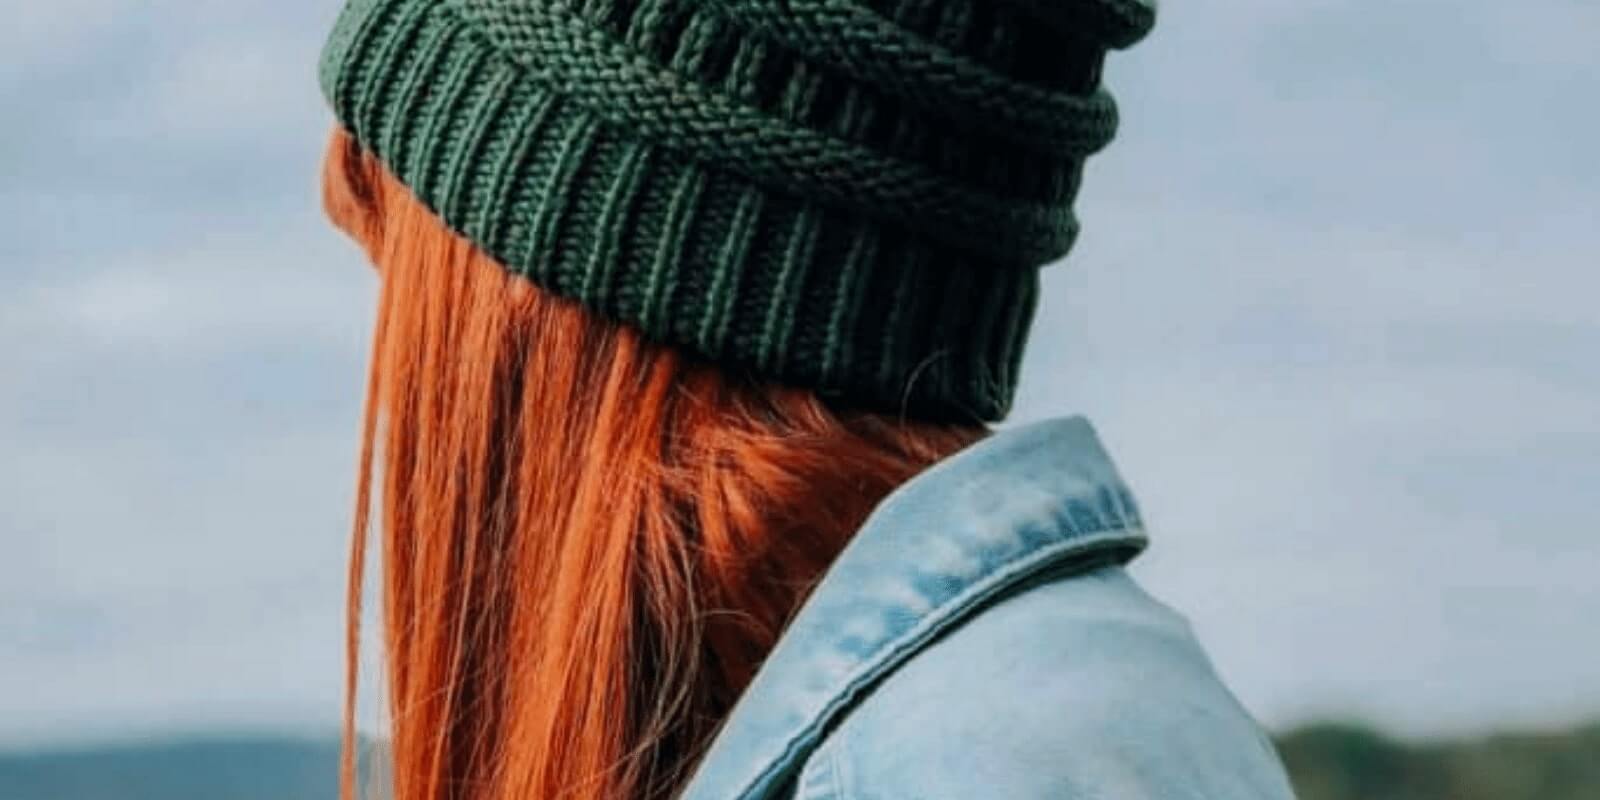 A girl wearing a green beanie looking behind